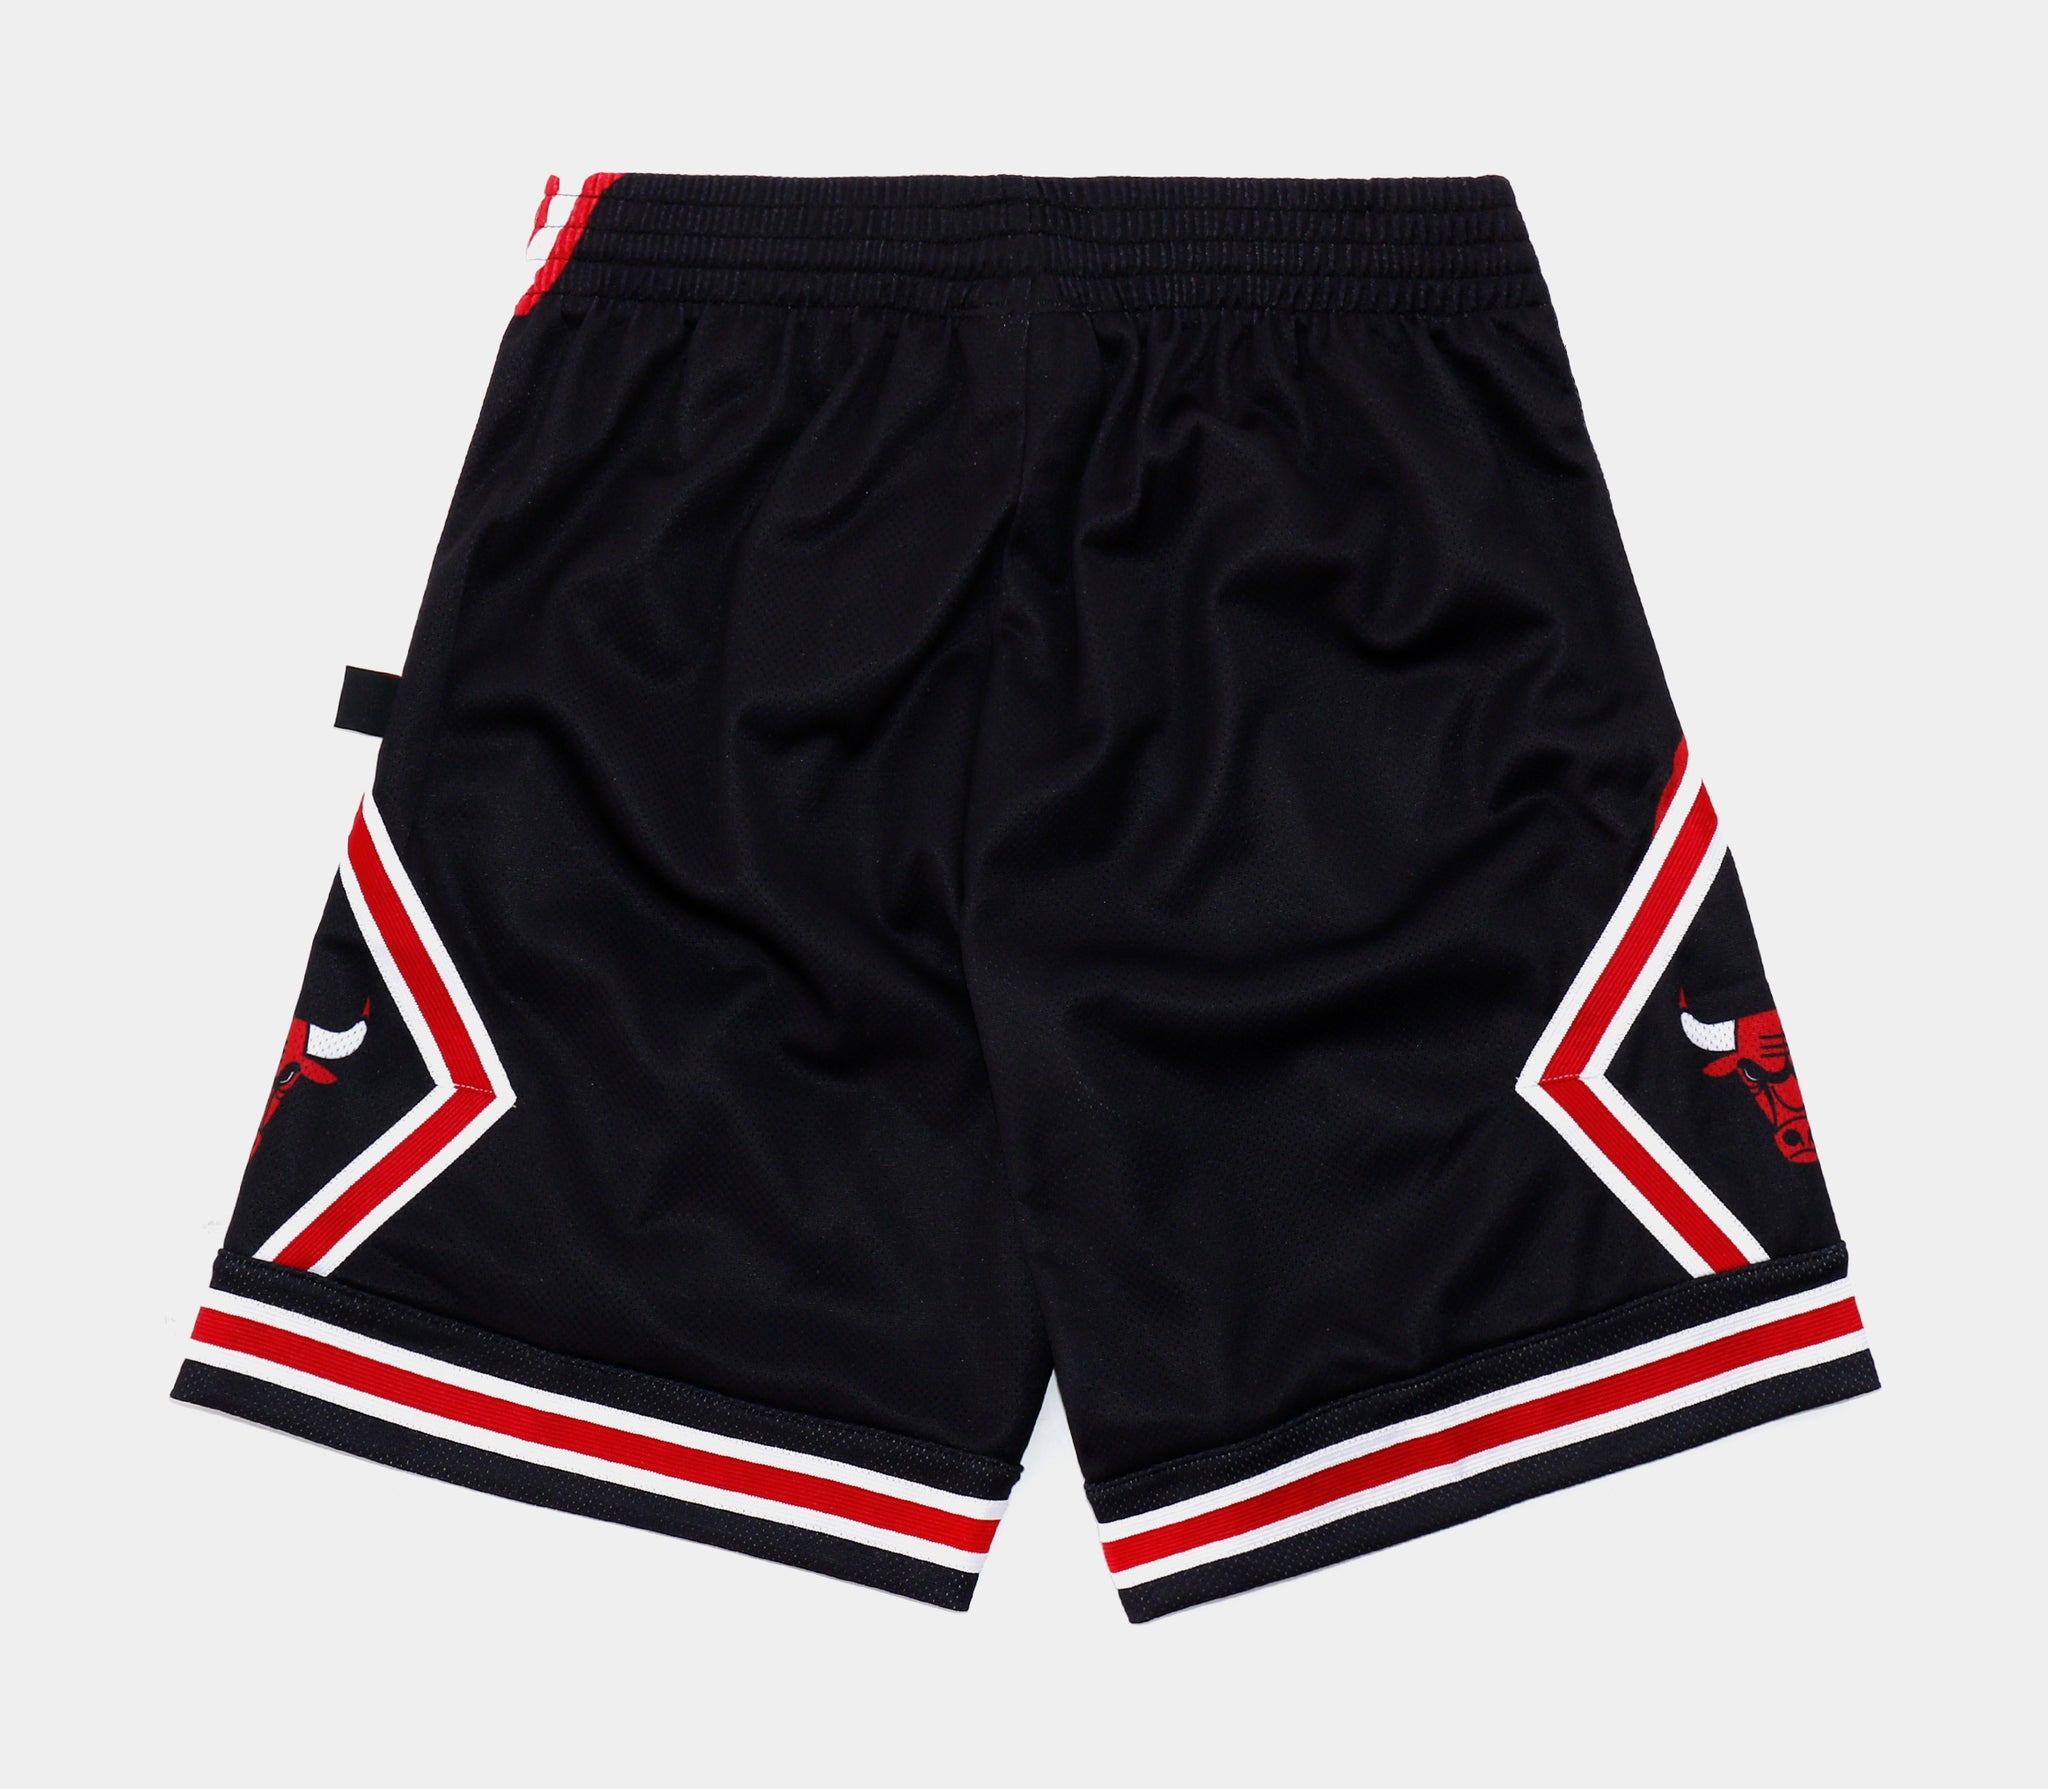 Chicago Bulls White Shorts For Men - Sizes Available for Sale in